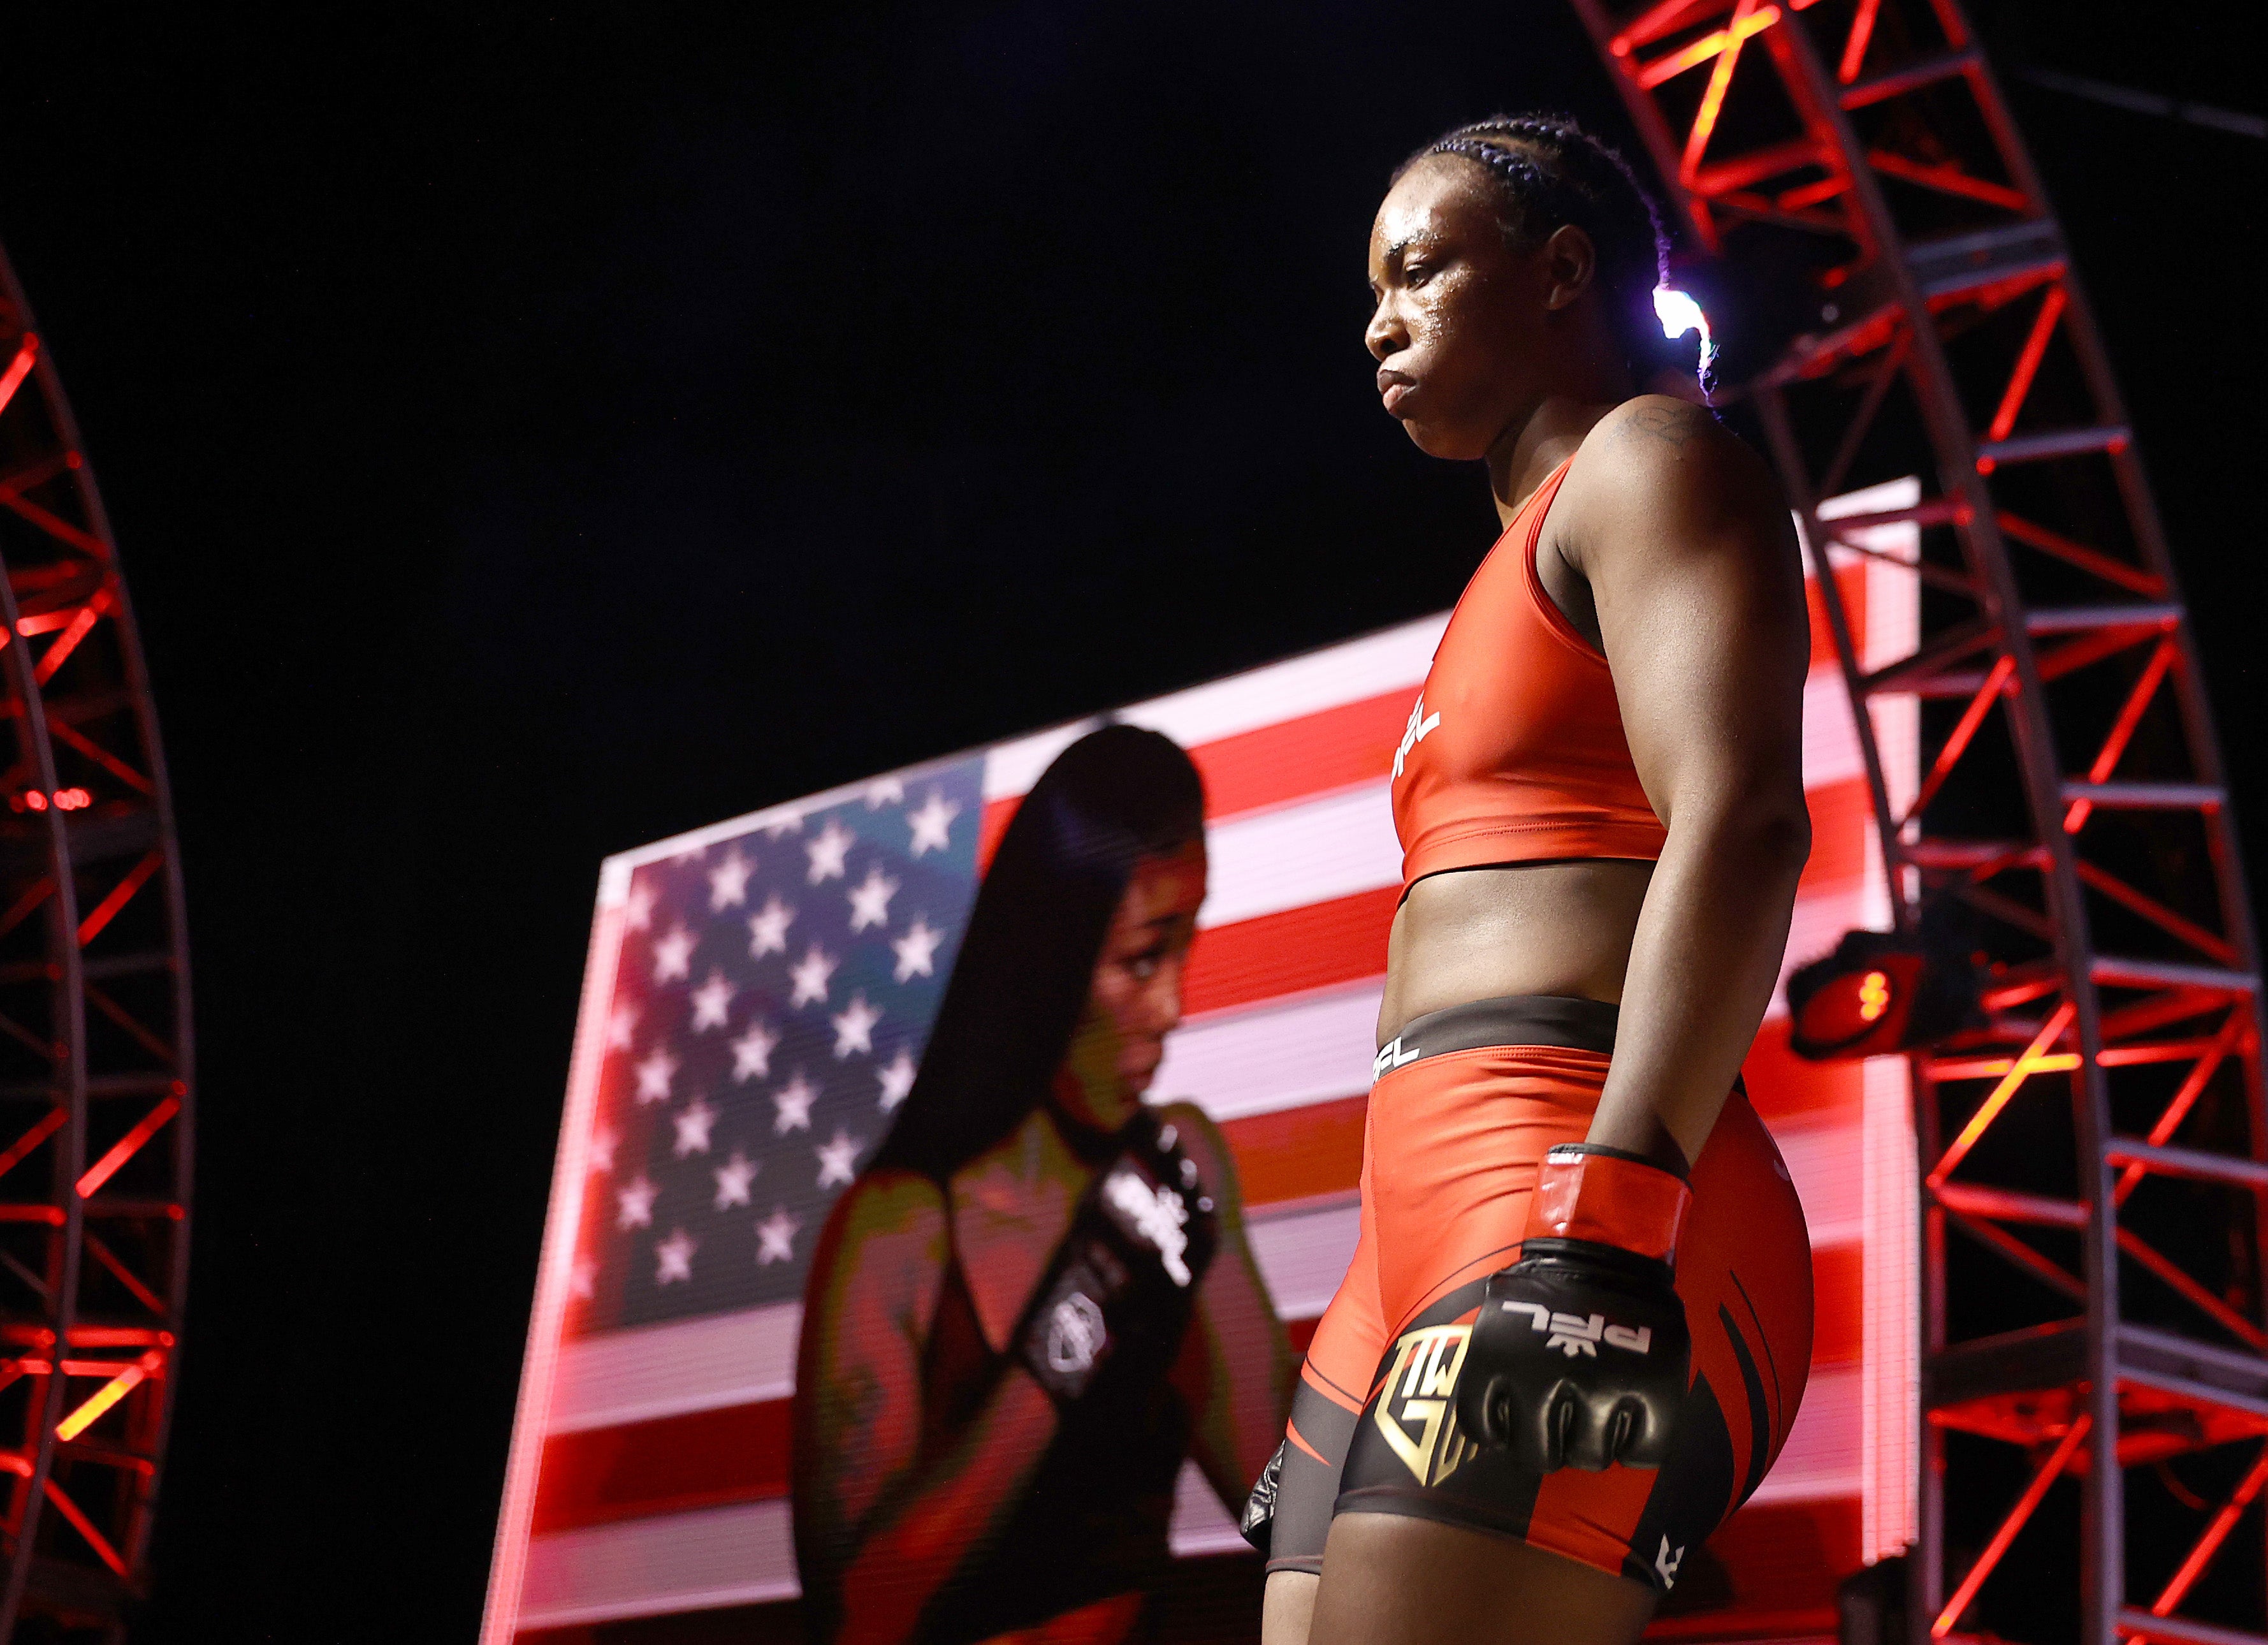 Claressa Shields lost her second MMA bout